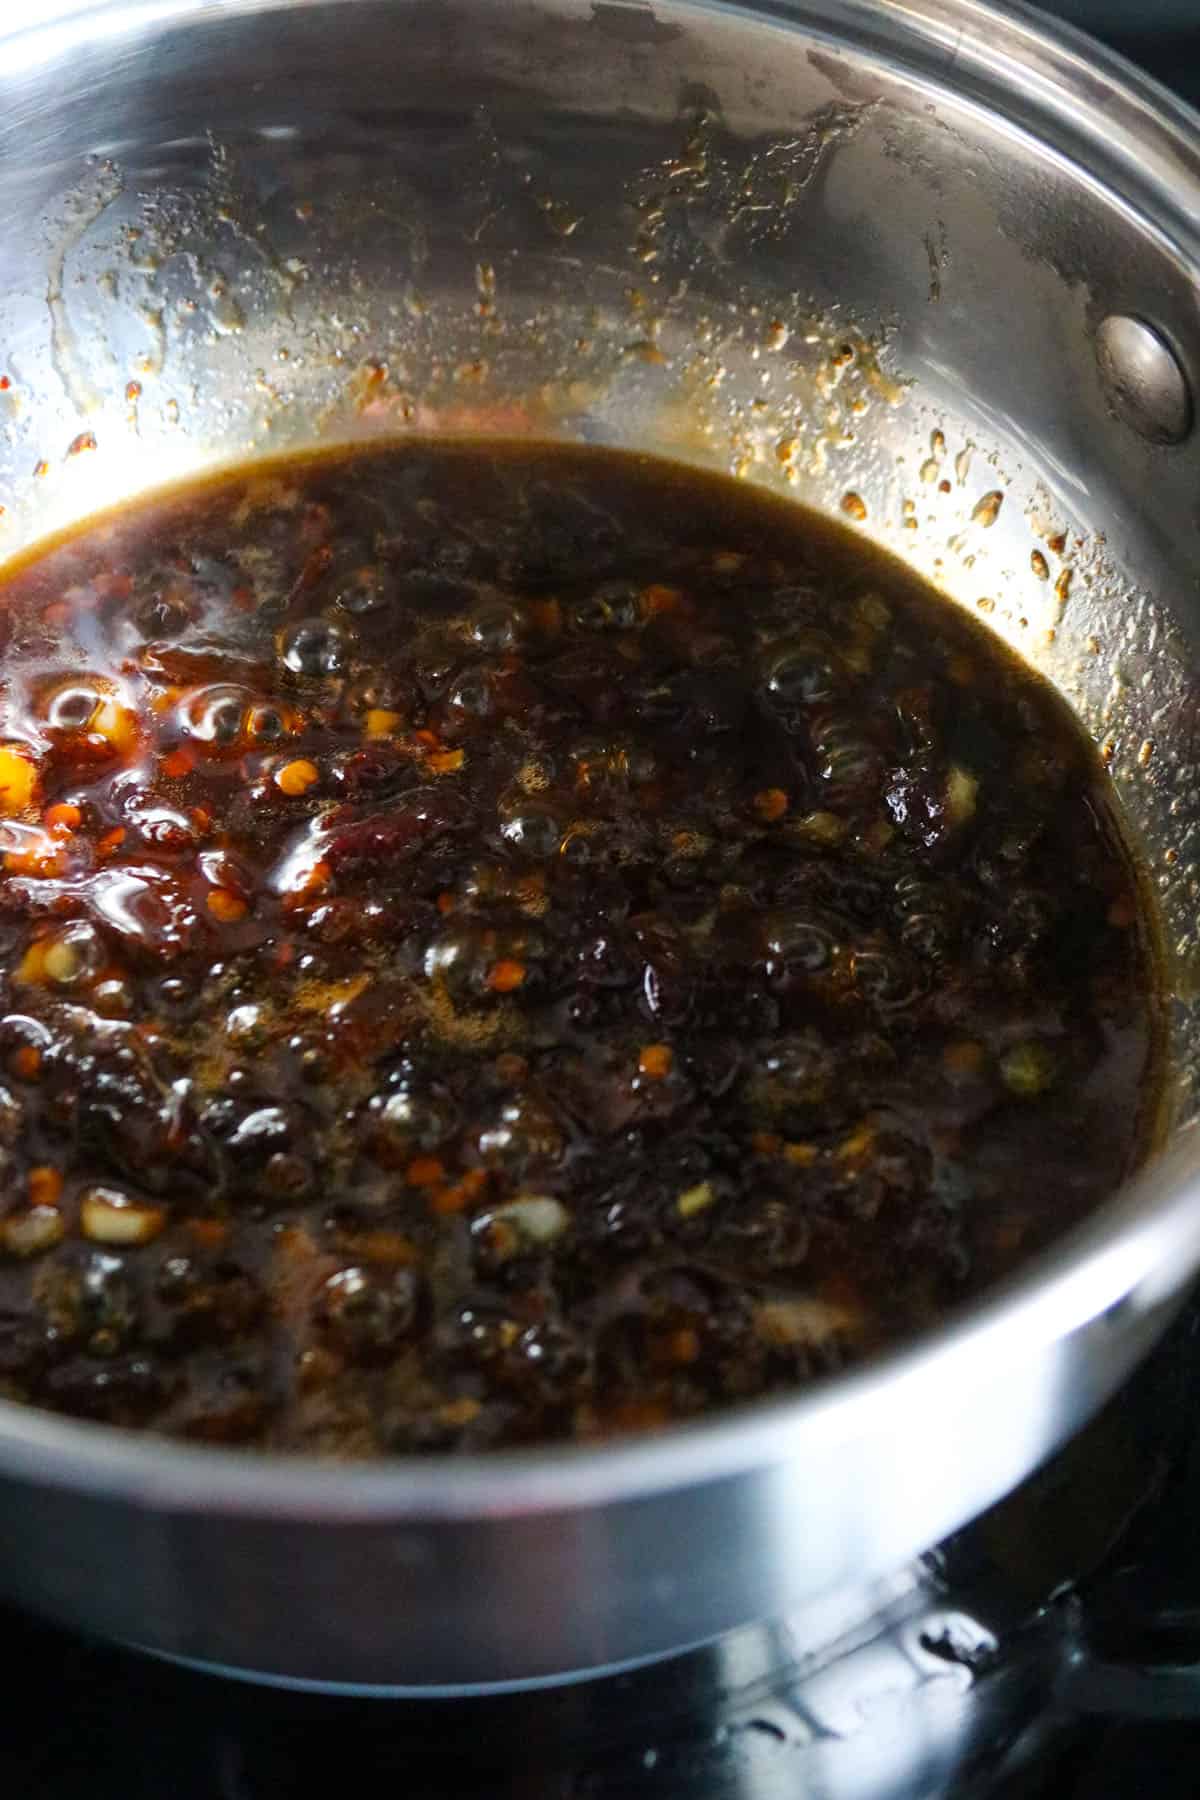 The honey chipotle sauce cooking in a saucepan.